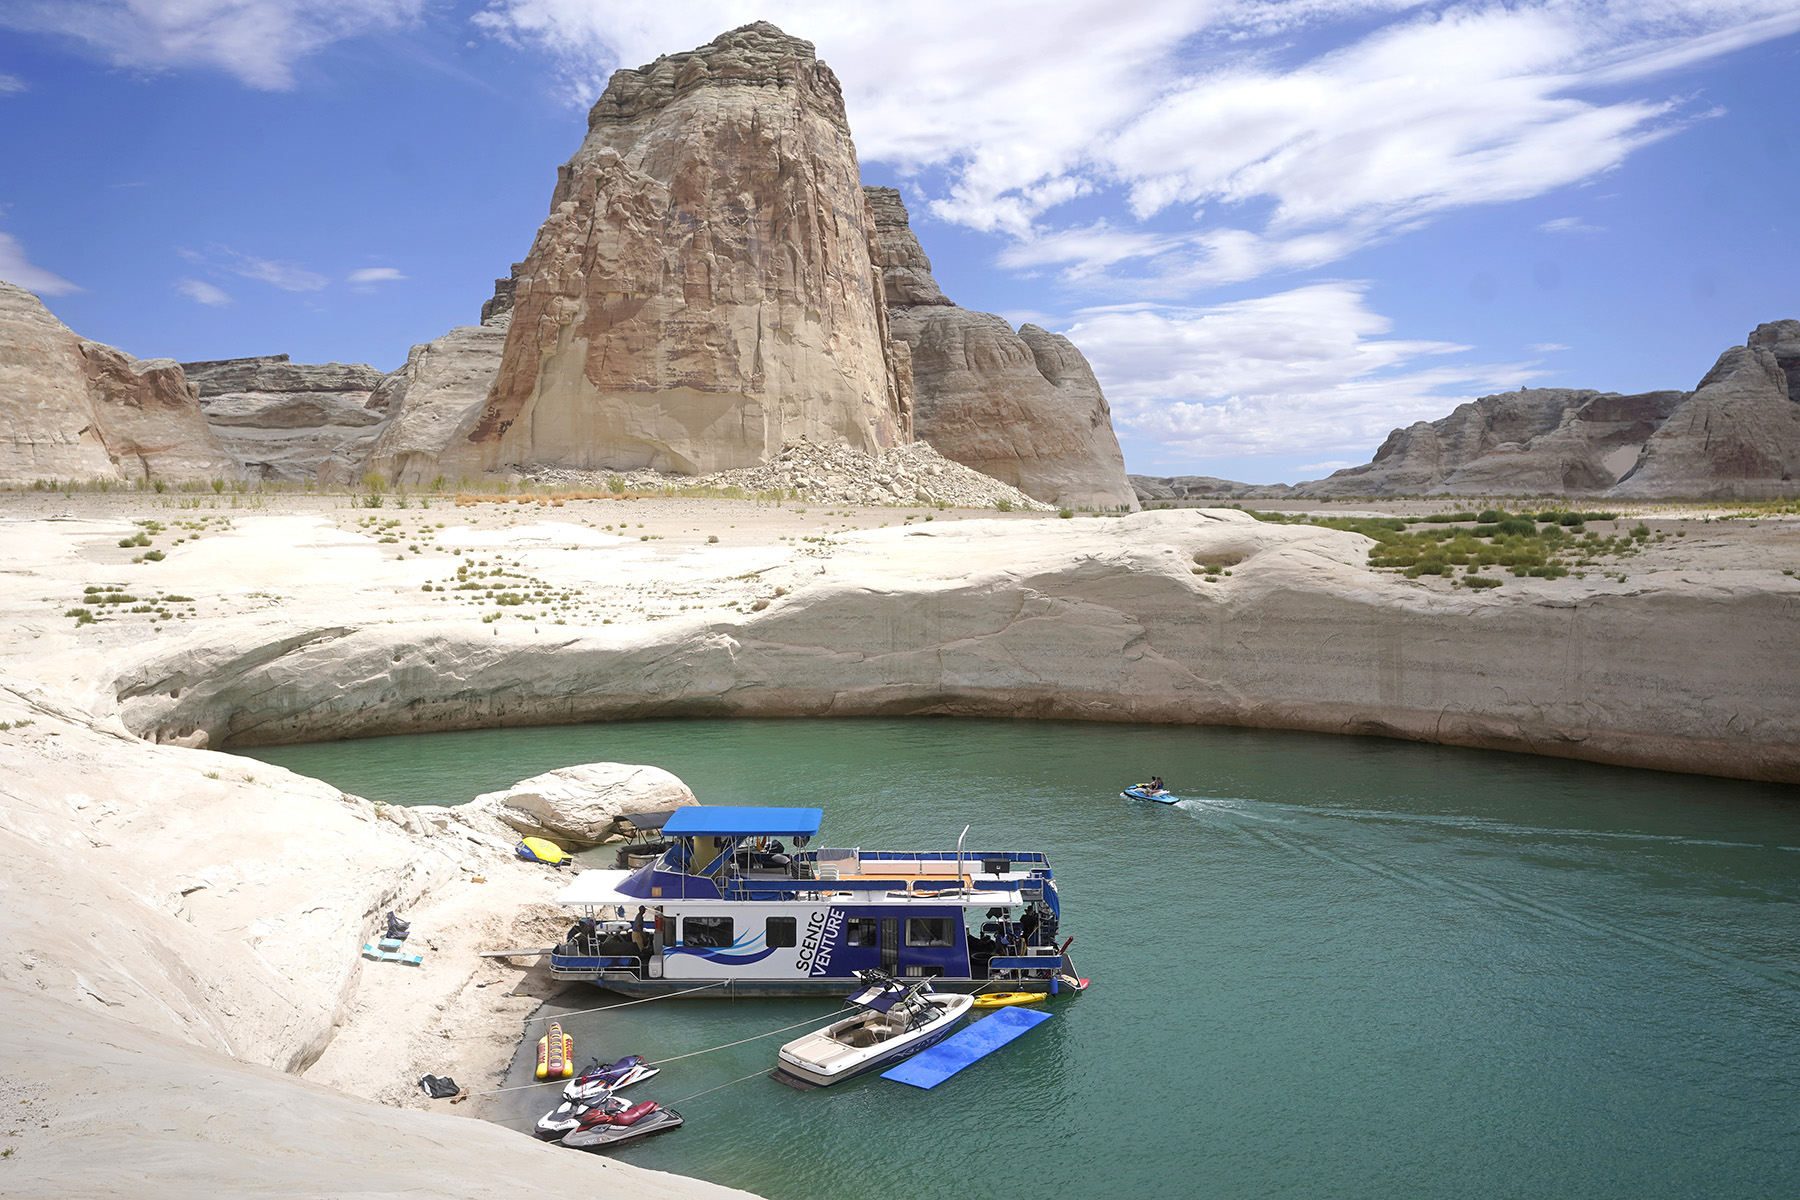 U.S. to hold back Lake Powell water to protect hydropower Williams